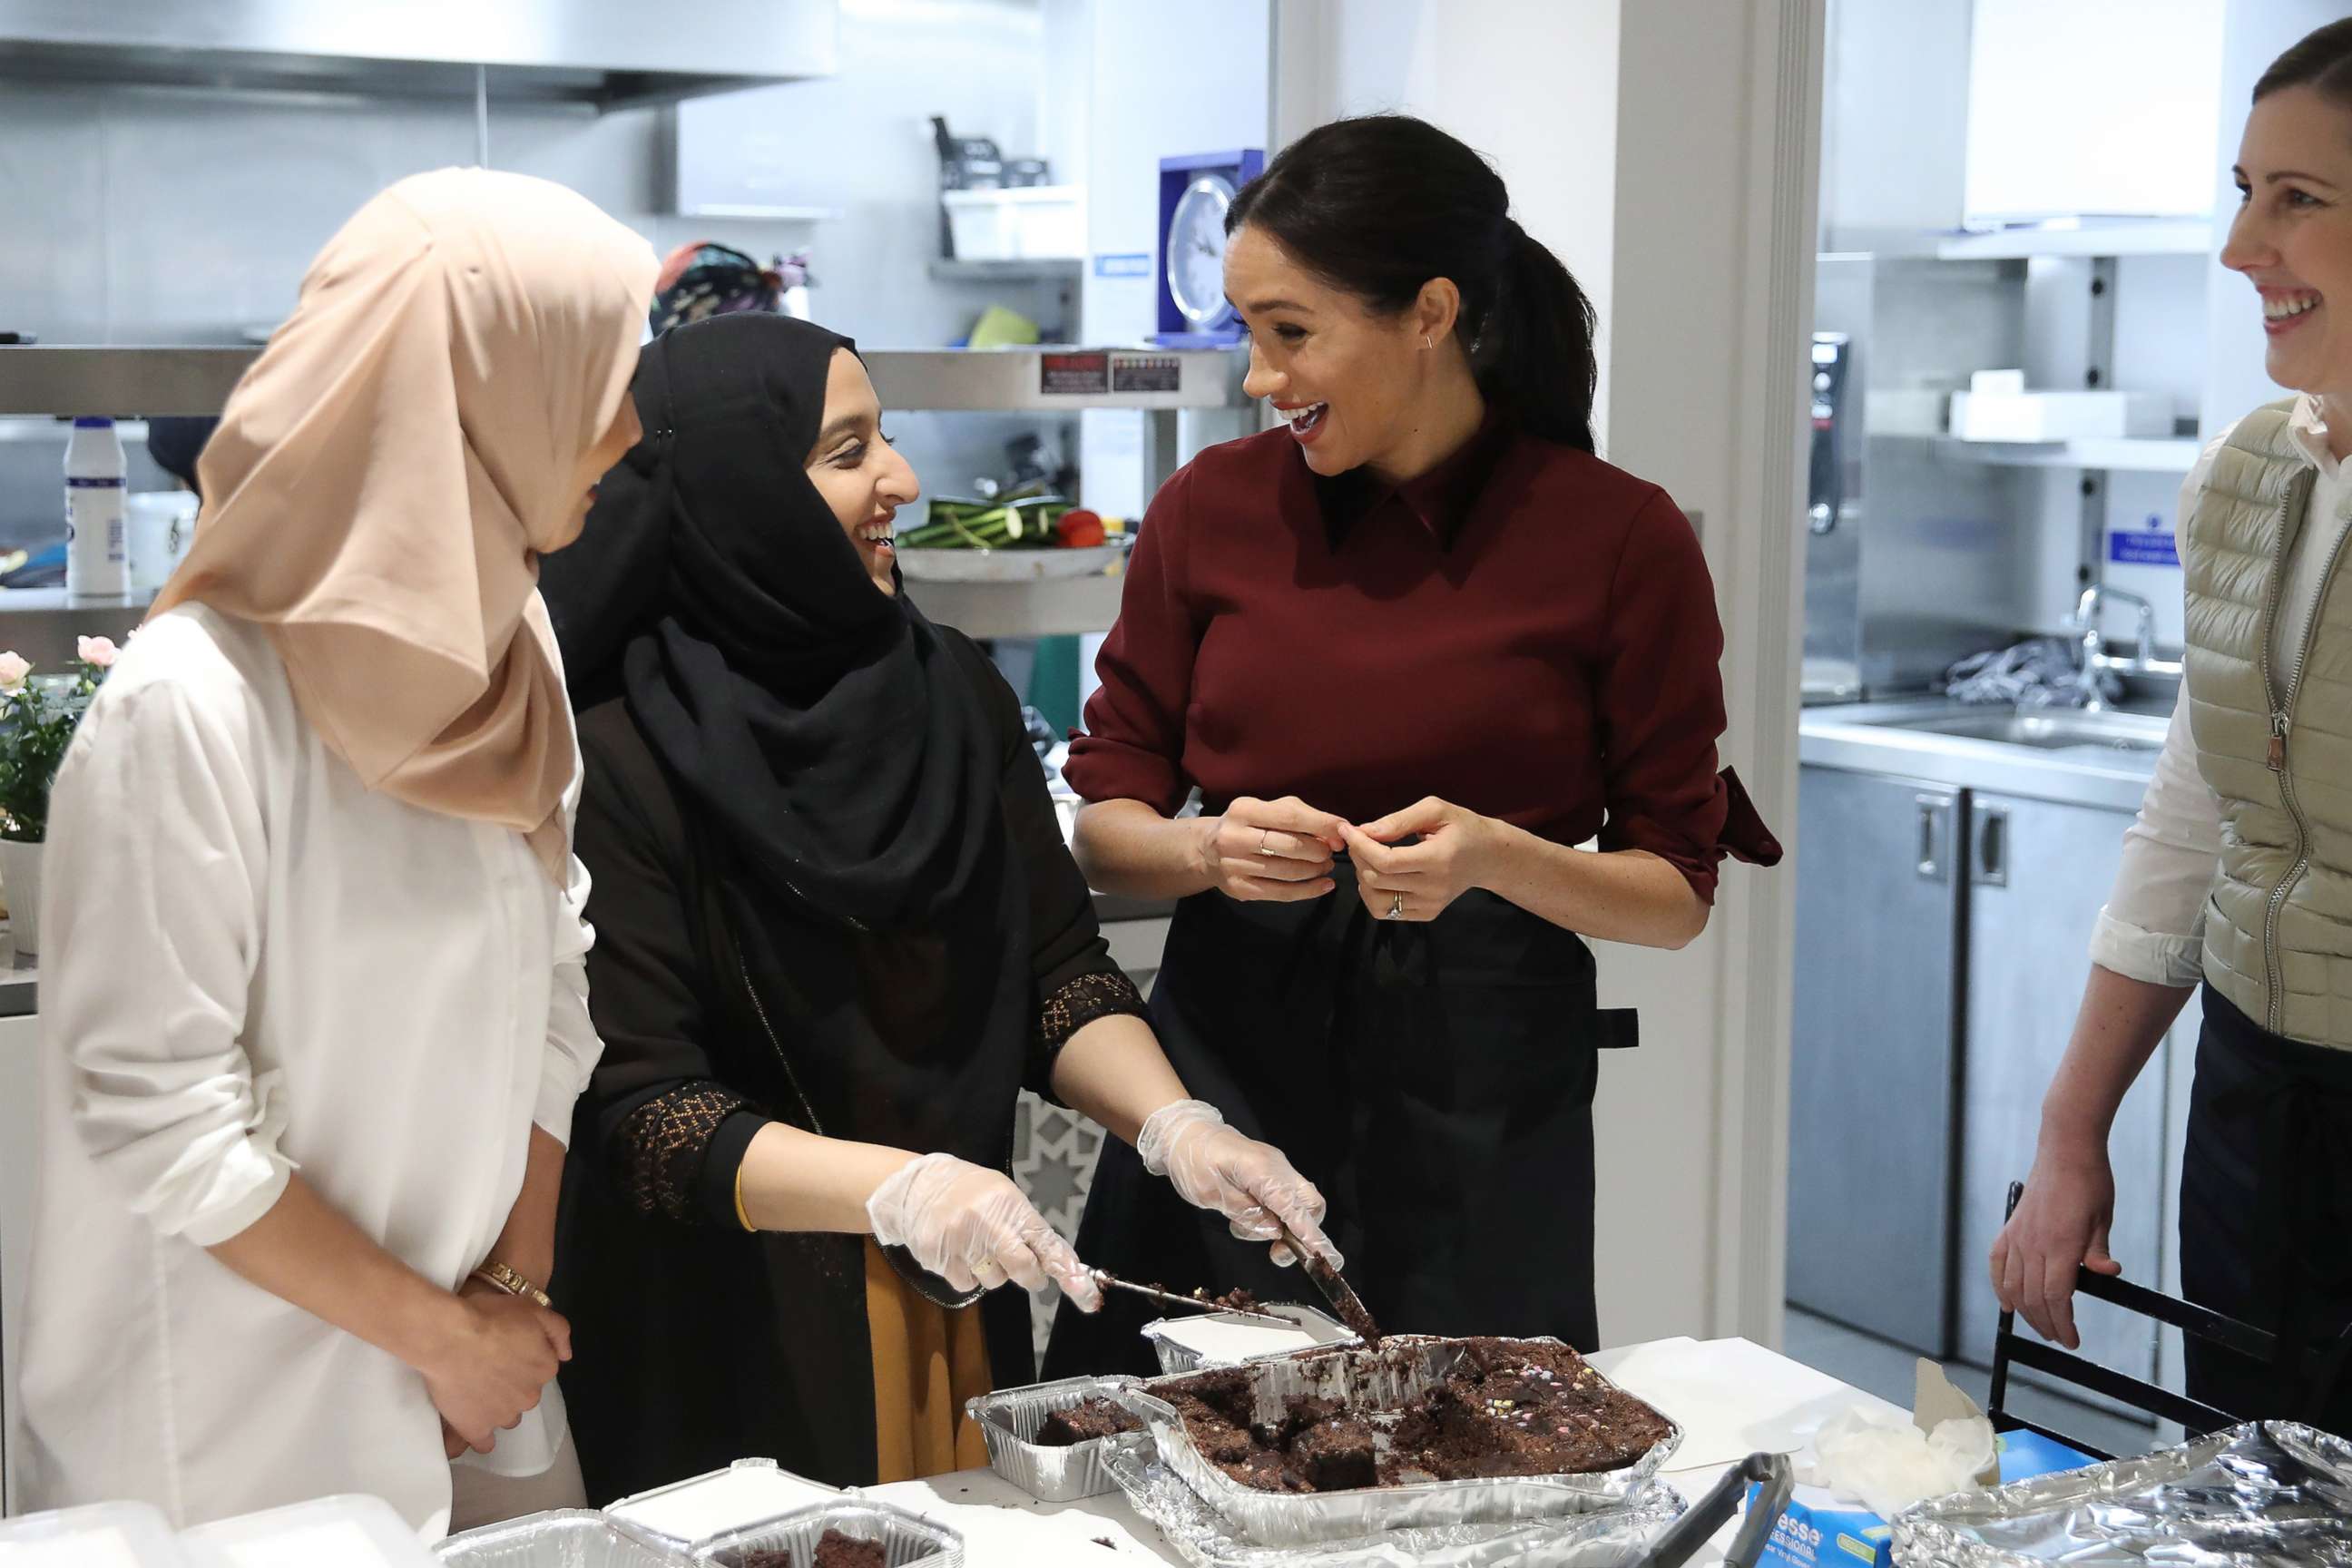 Meghan Markle Cooks for Prince George and Princess Charlotte - How